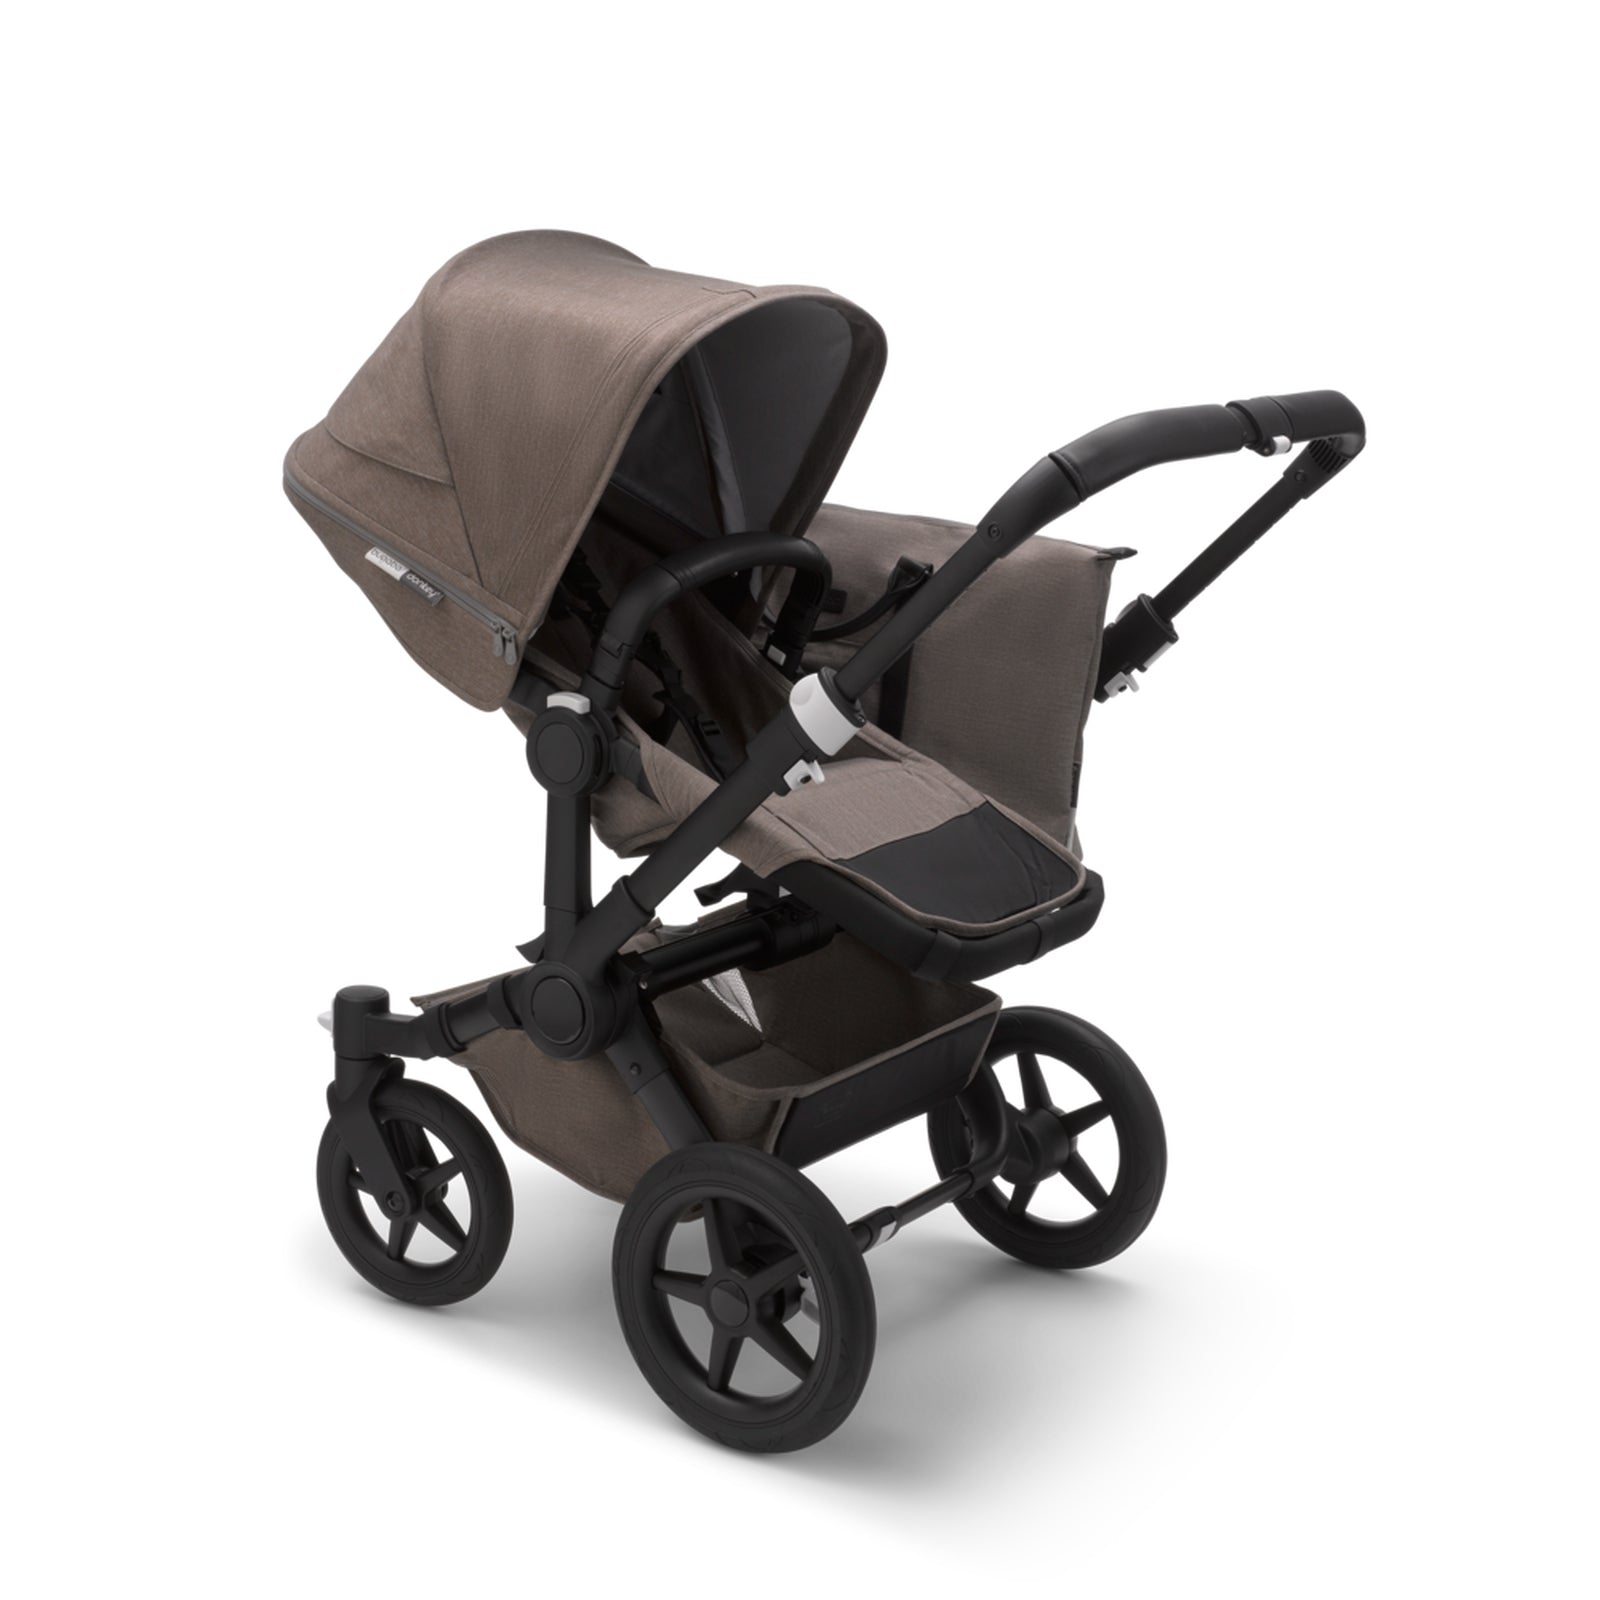 Bugaboo Donkey 3 Mono Seat and Carrycot Pushchair - Mineral Taupe Melange